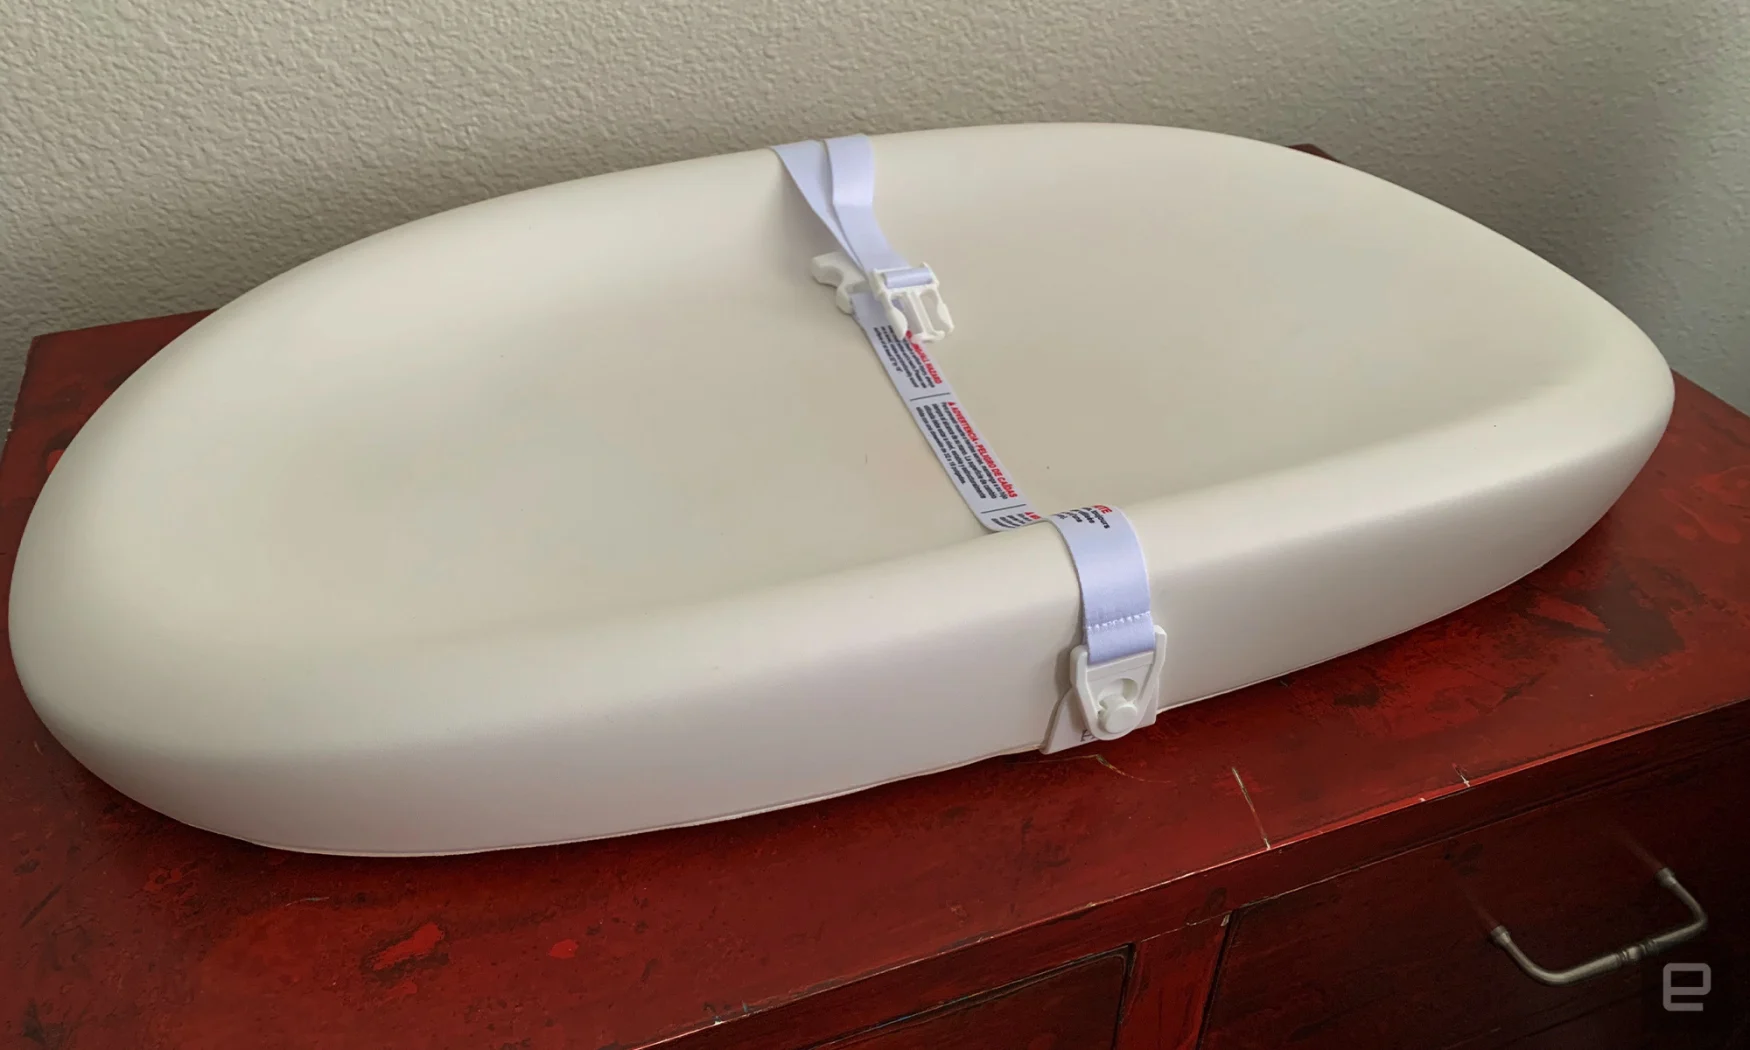 The Hatch Baby Grow smart changing pad.